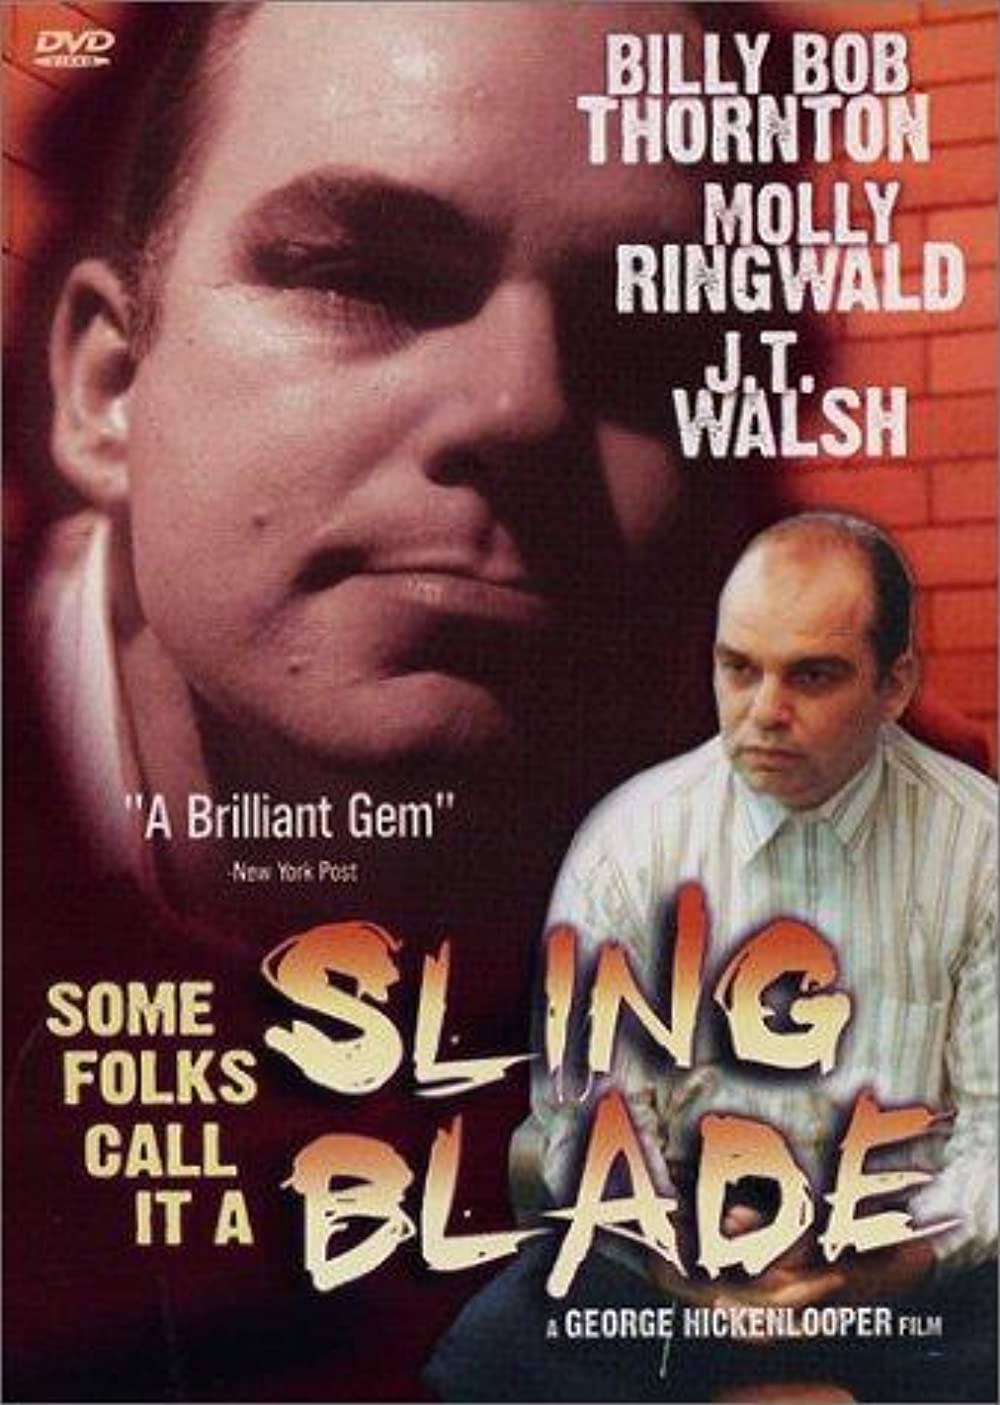 Some Folks Call It a Sling Blade (Short 1994)